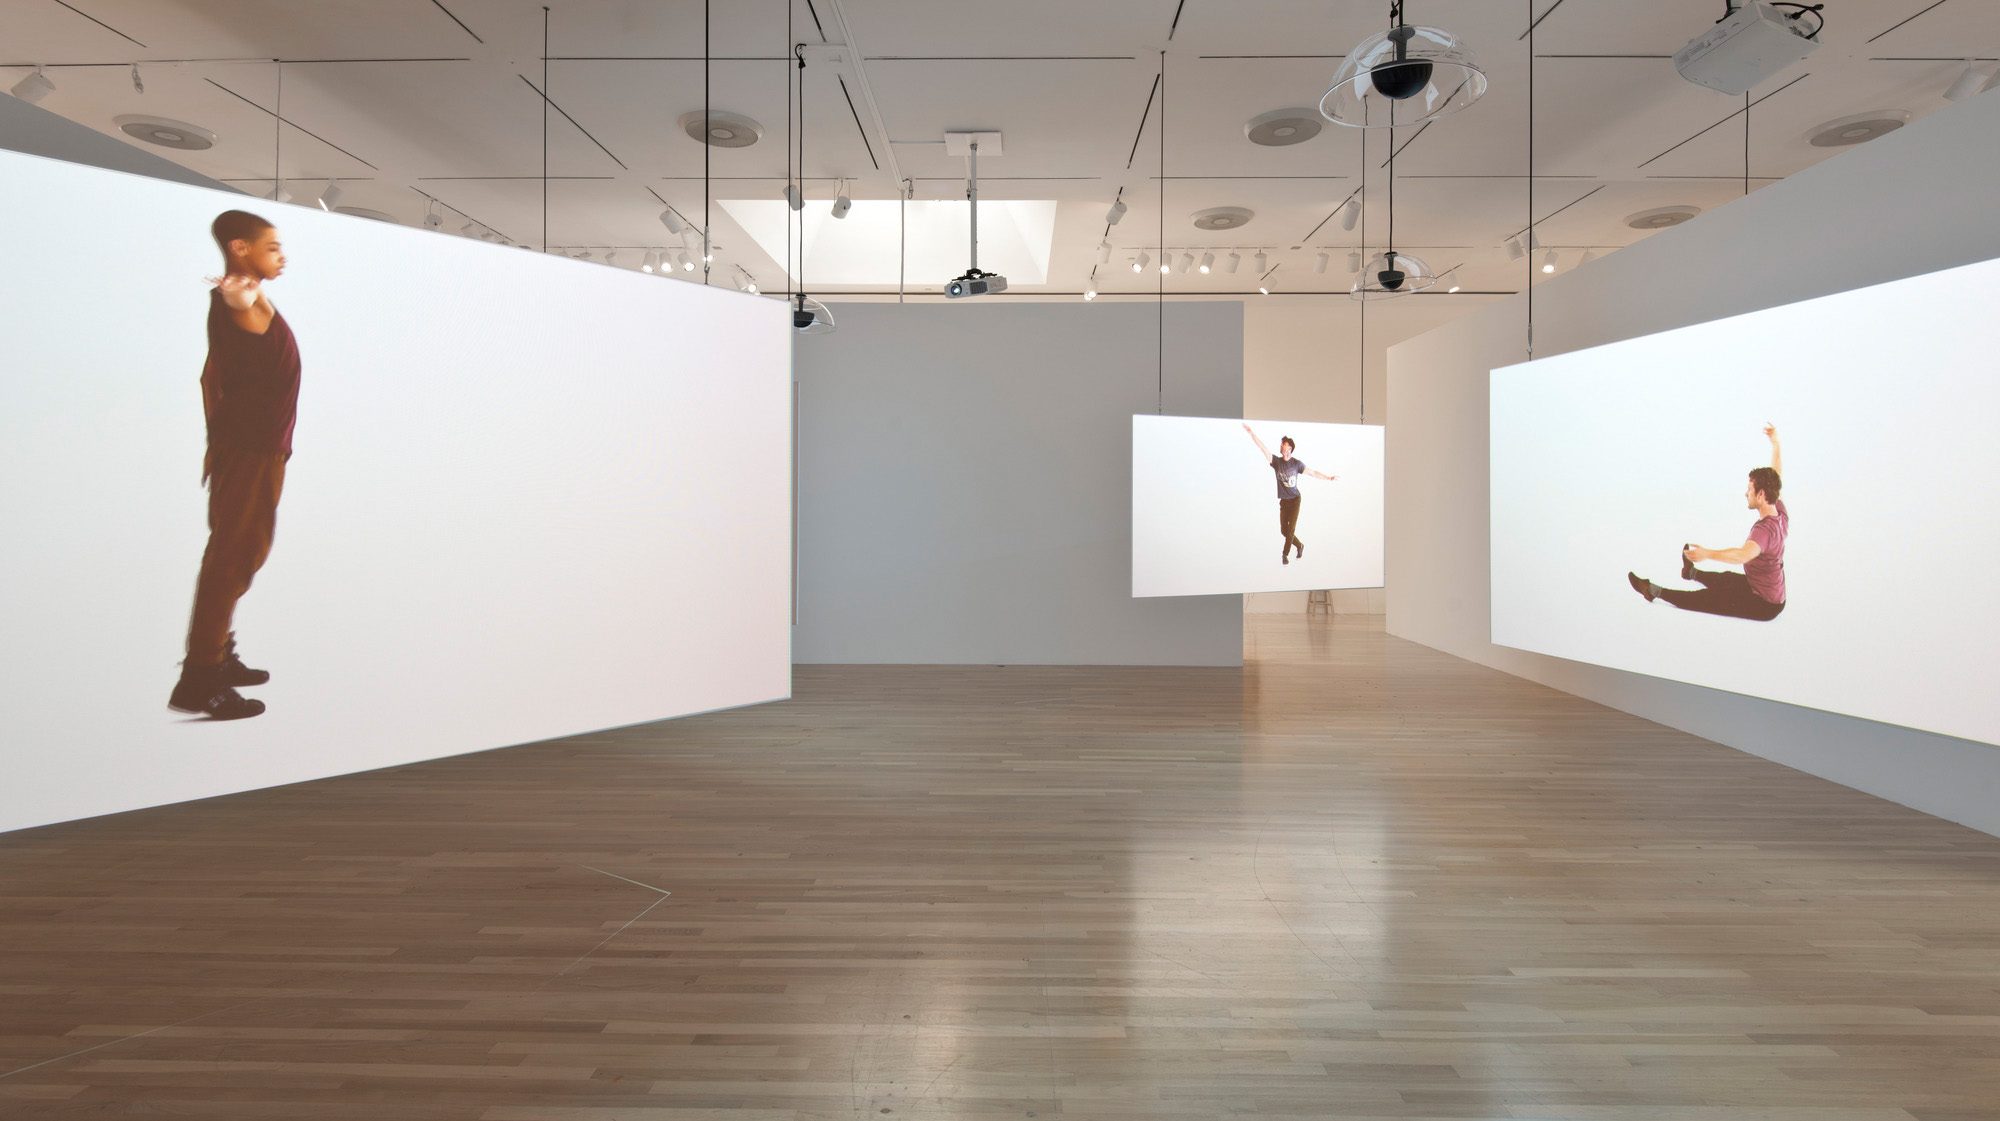 Gerard & Kelly. <em>Kiss Solo</em>, 2012. <em>Made in L.A. 2014</em>. Installation view at the Hammer Museum, Los Angeles. June 15-September 7, 2014. Photography by Brian Forrest.